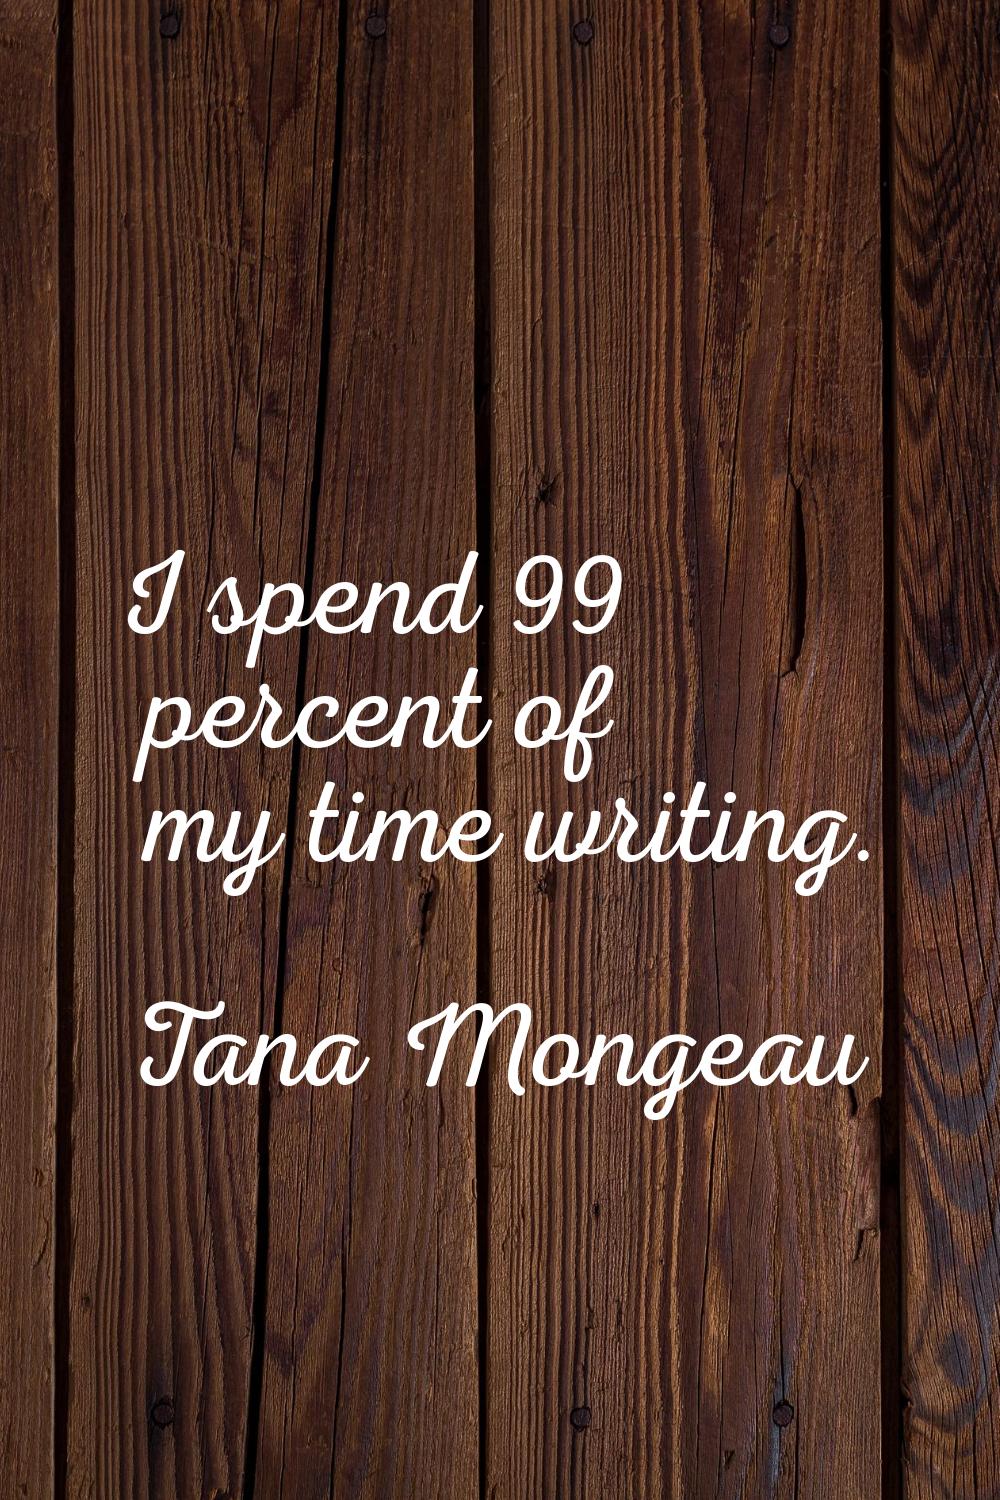 I spend 99 percent of my time writing.